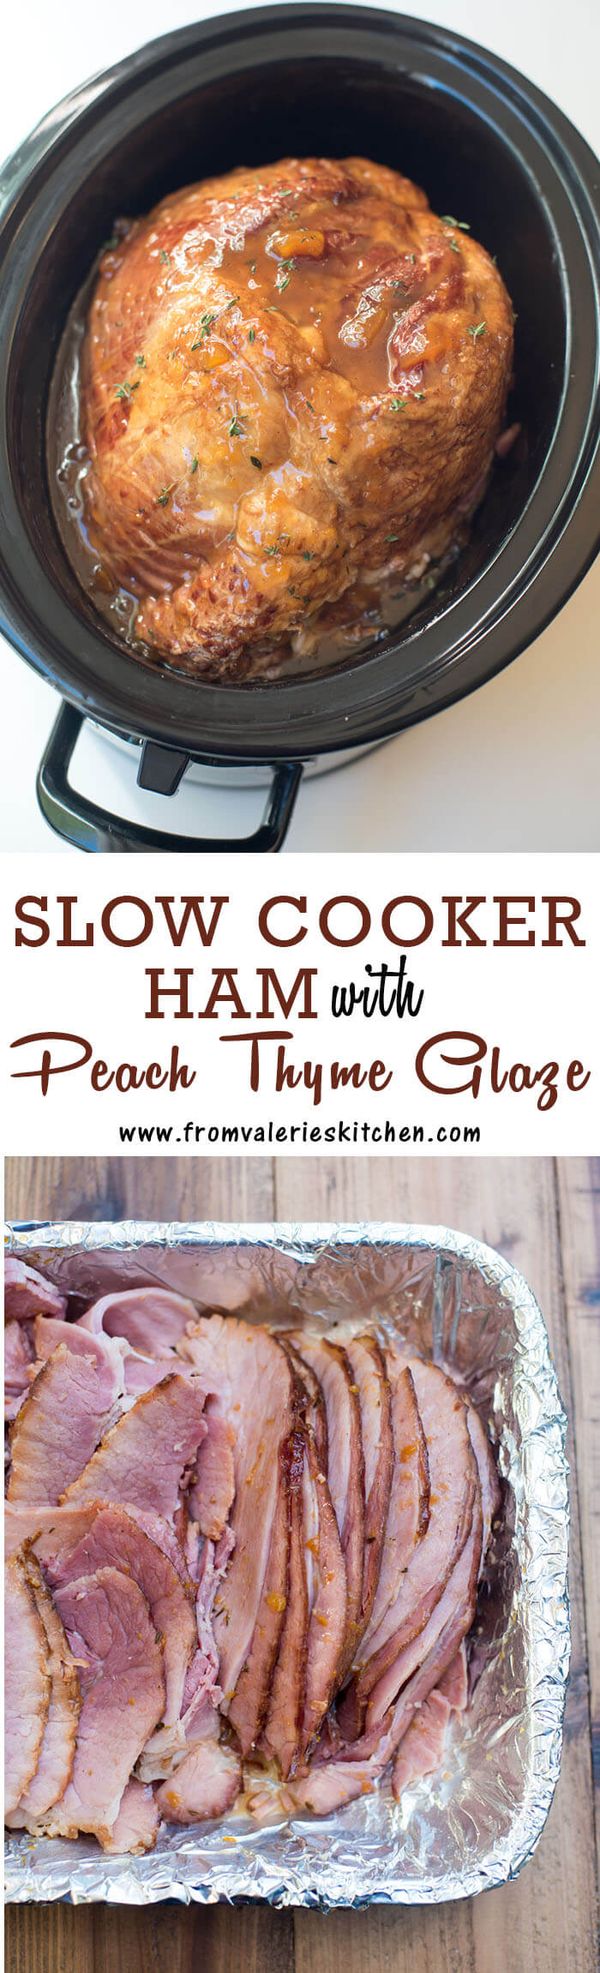 Slow Cooker Ham with Peach Thyme Glaze